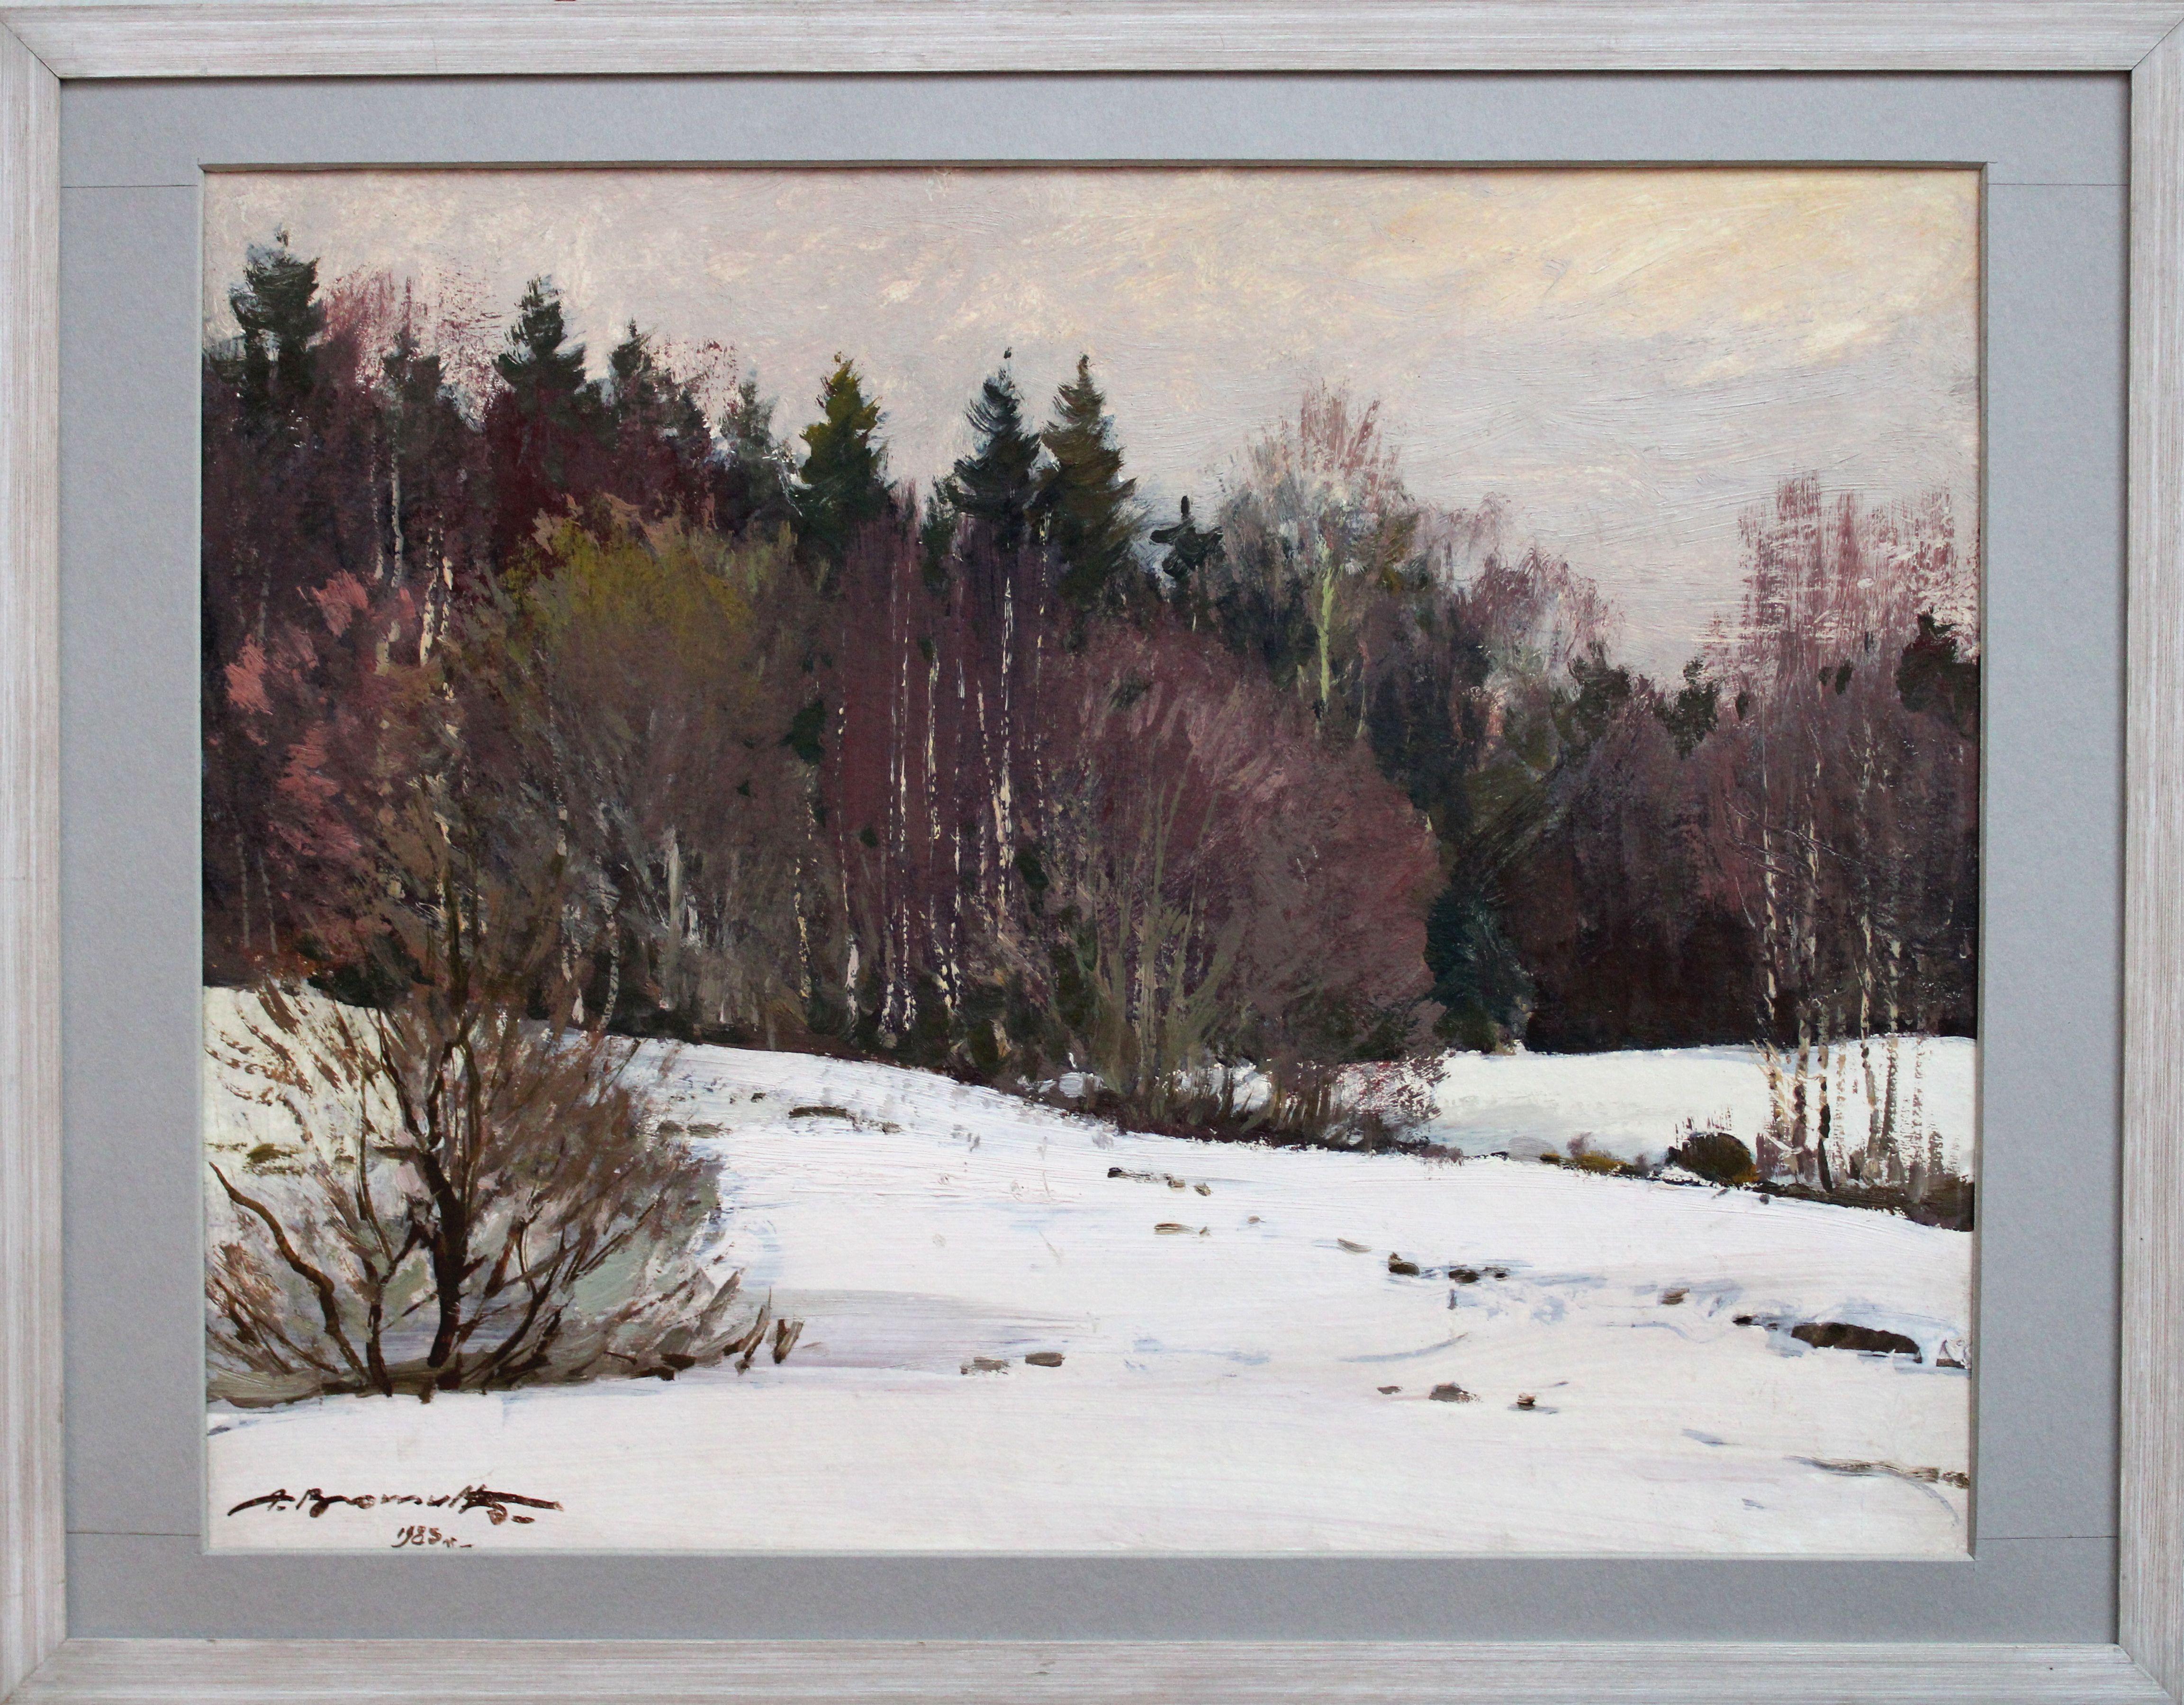 Forest edge at winter. 1983. Oil on cardboard, 40x50 cm - Gray Landscape Painting by Alfejs Bromults